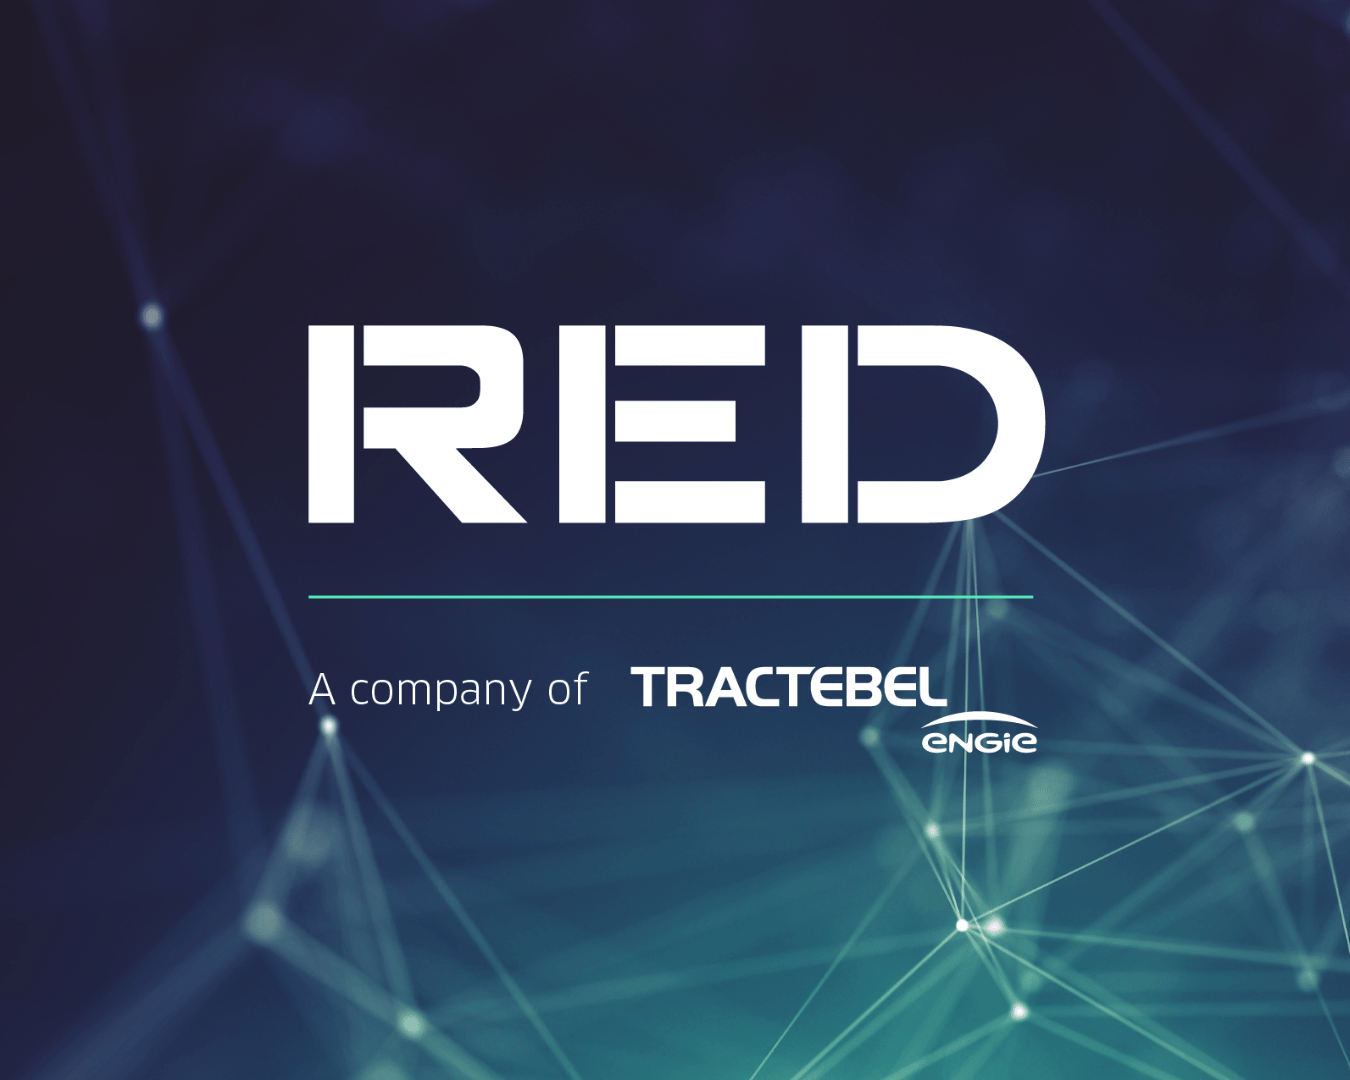 RED Engineering Design Unveils Refreshed Corporate Identity and Aligns with Parent Company, Tractebel